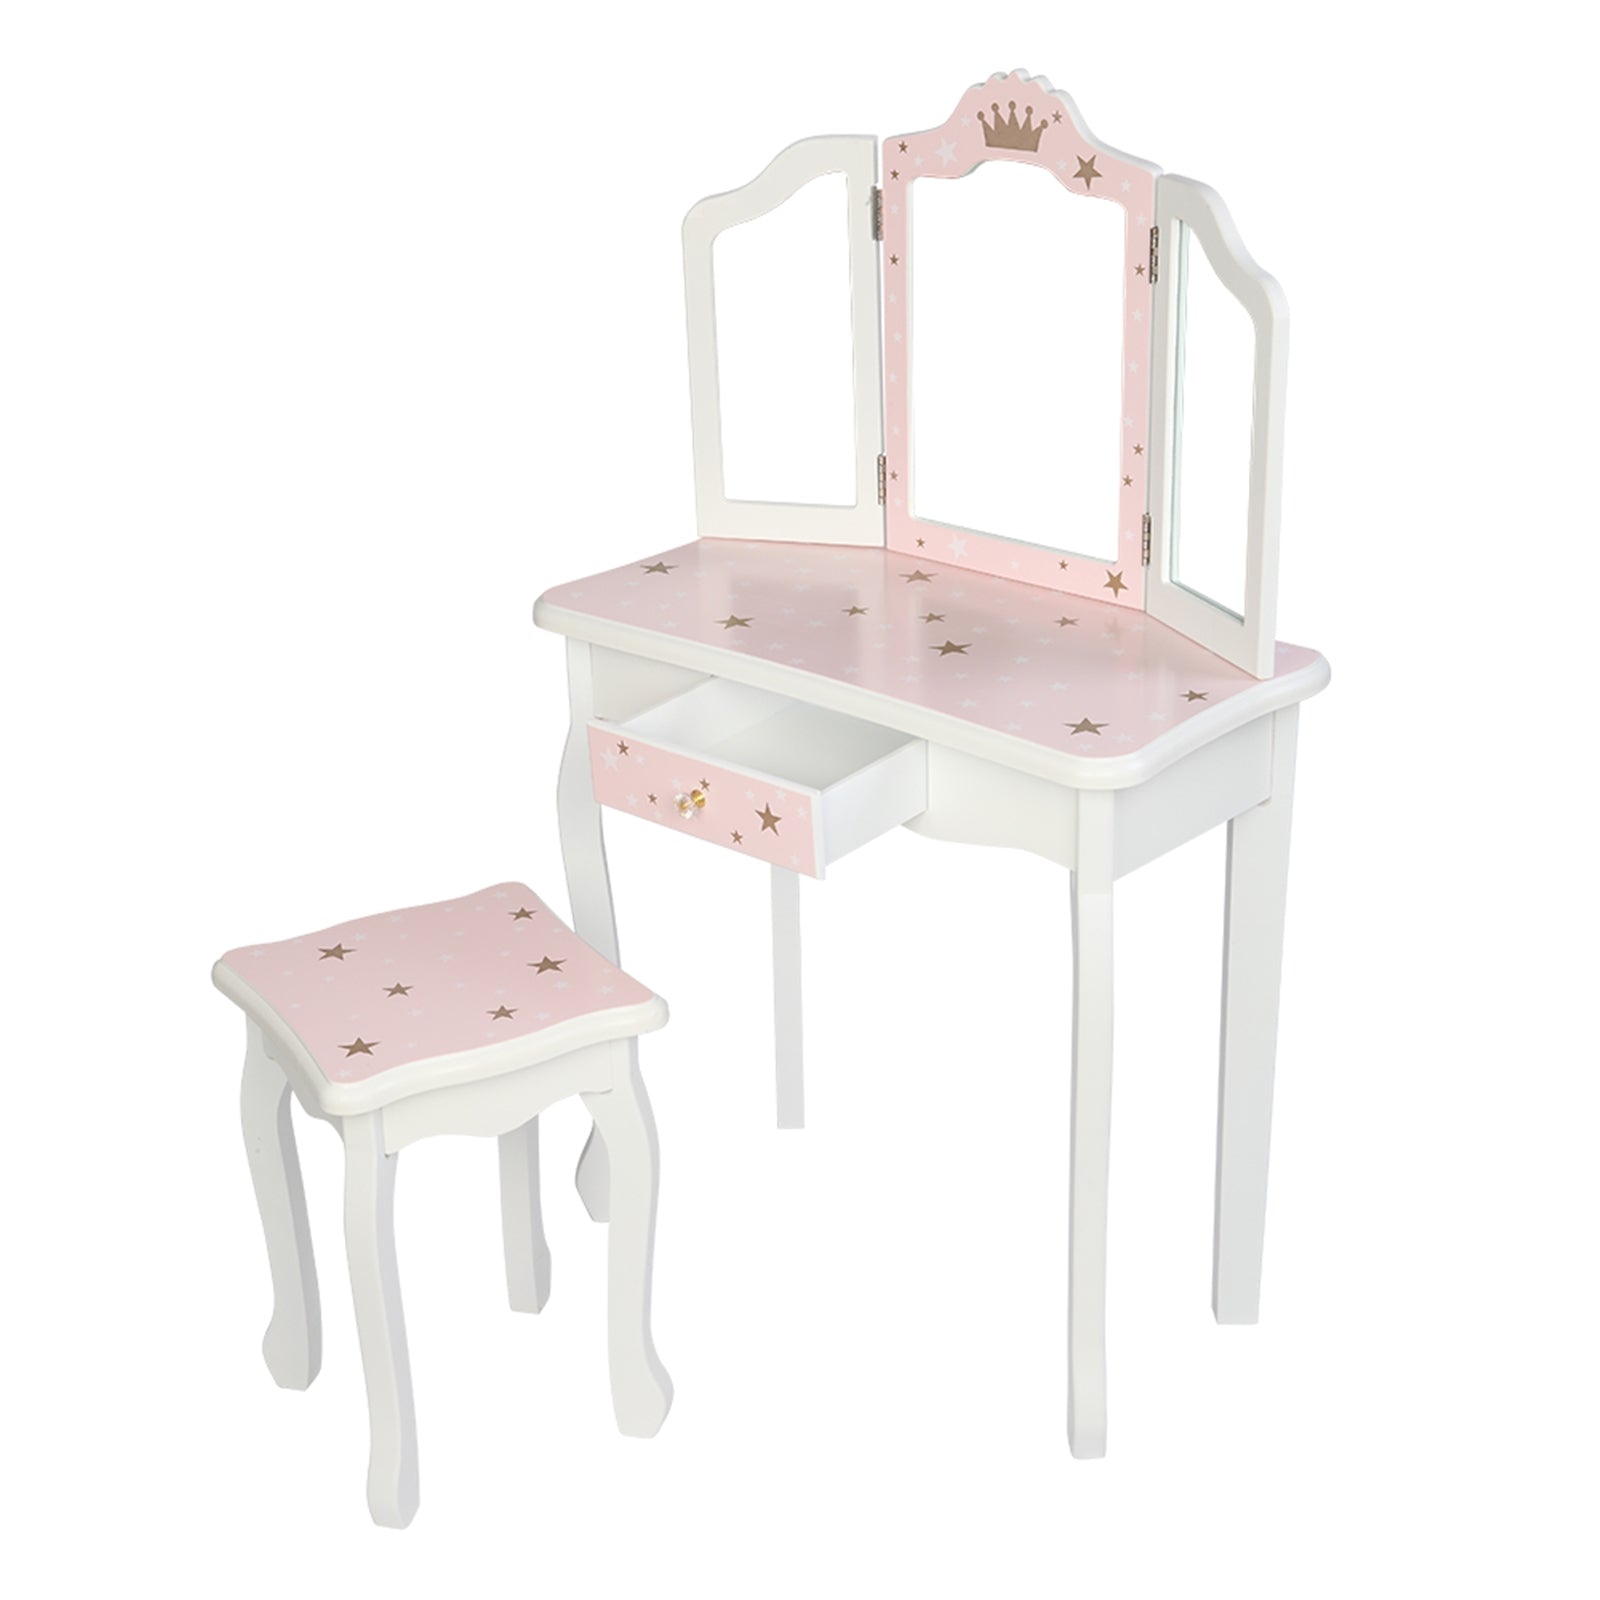 Kids Vanity Wooden Makeup Table and Chair Set - TOYSHIP